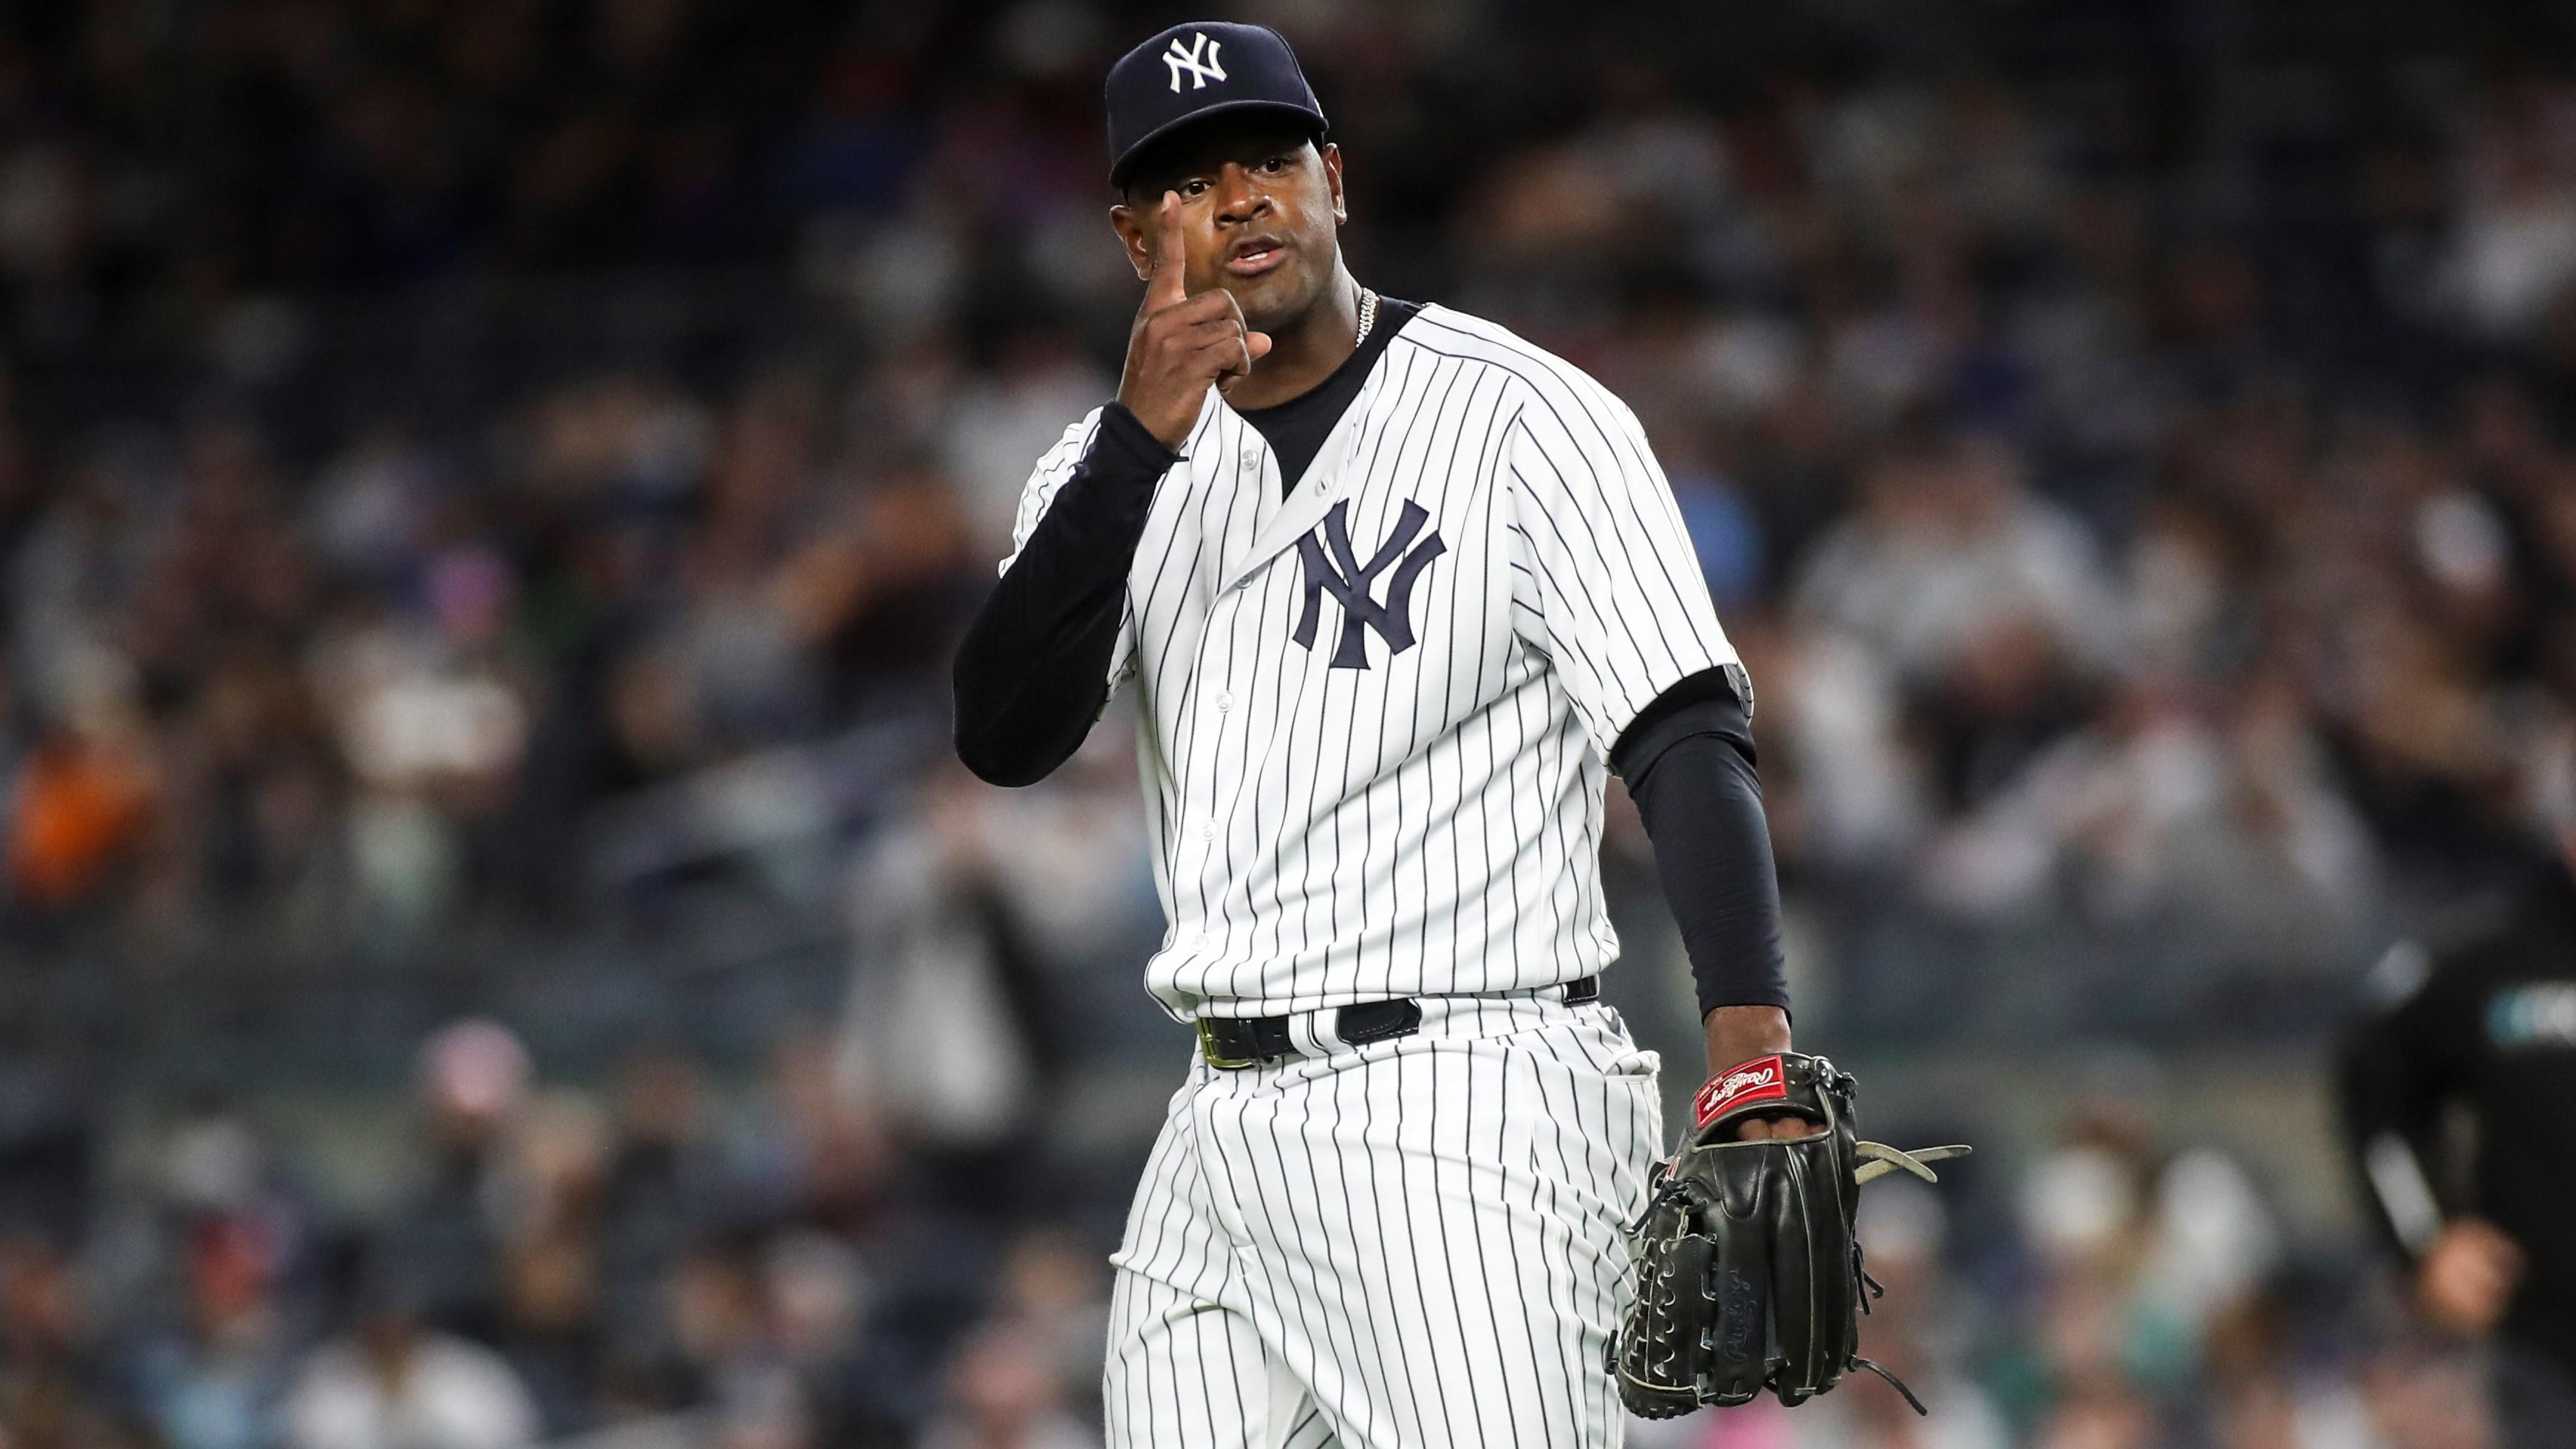 Apr 14, 2022; Bronx, New York, USA; New York Yankees starting pitcher Luis Severino (40) exchanges words with the Toronto Blue Jays dugout in the first inning at Yankee Stadium. Mandatory Credit: Wendell Cruz-USA TODAY Sports / © Wendell Cruz-USA TODAY Sports